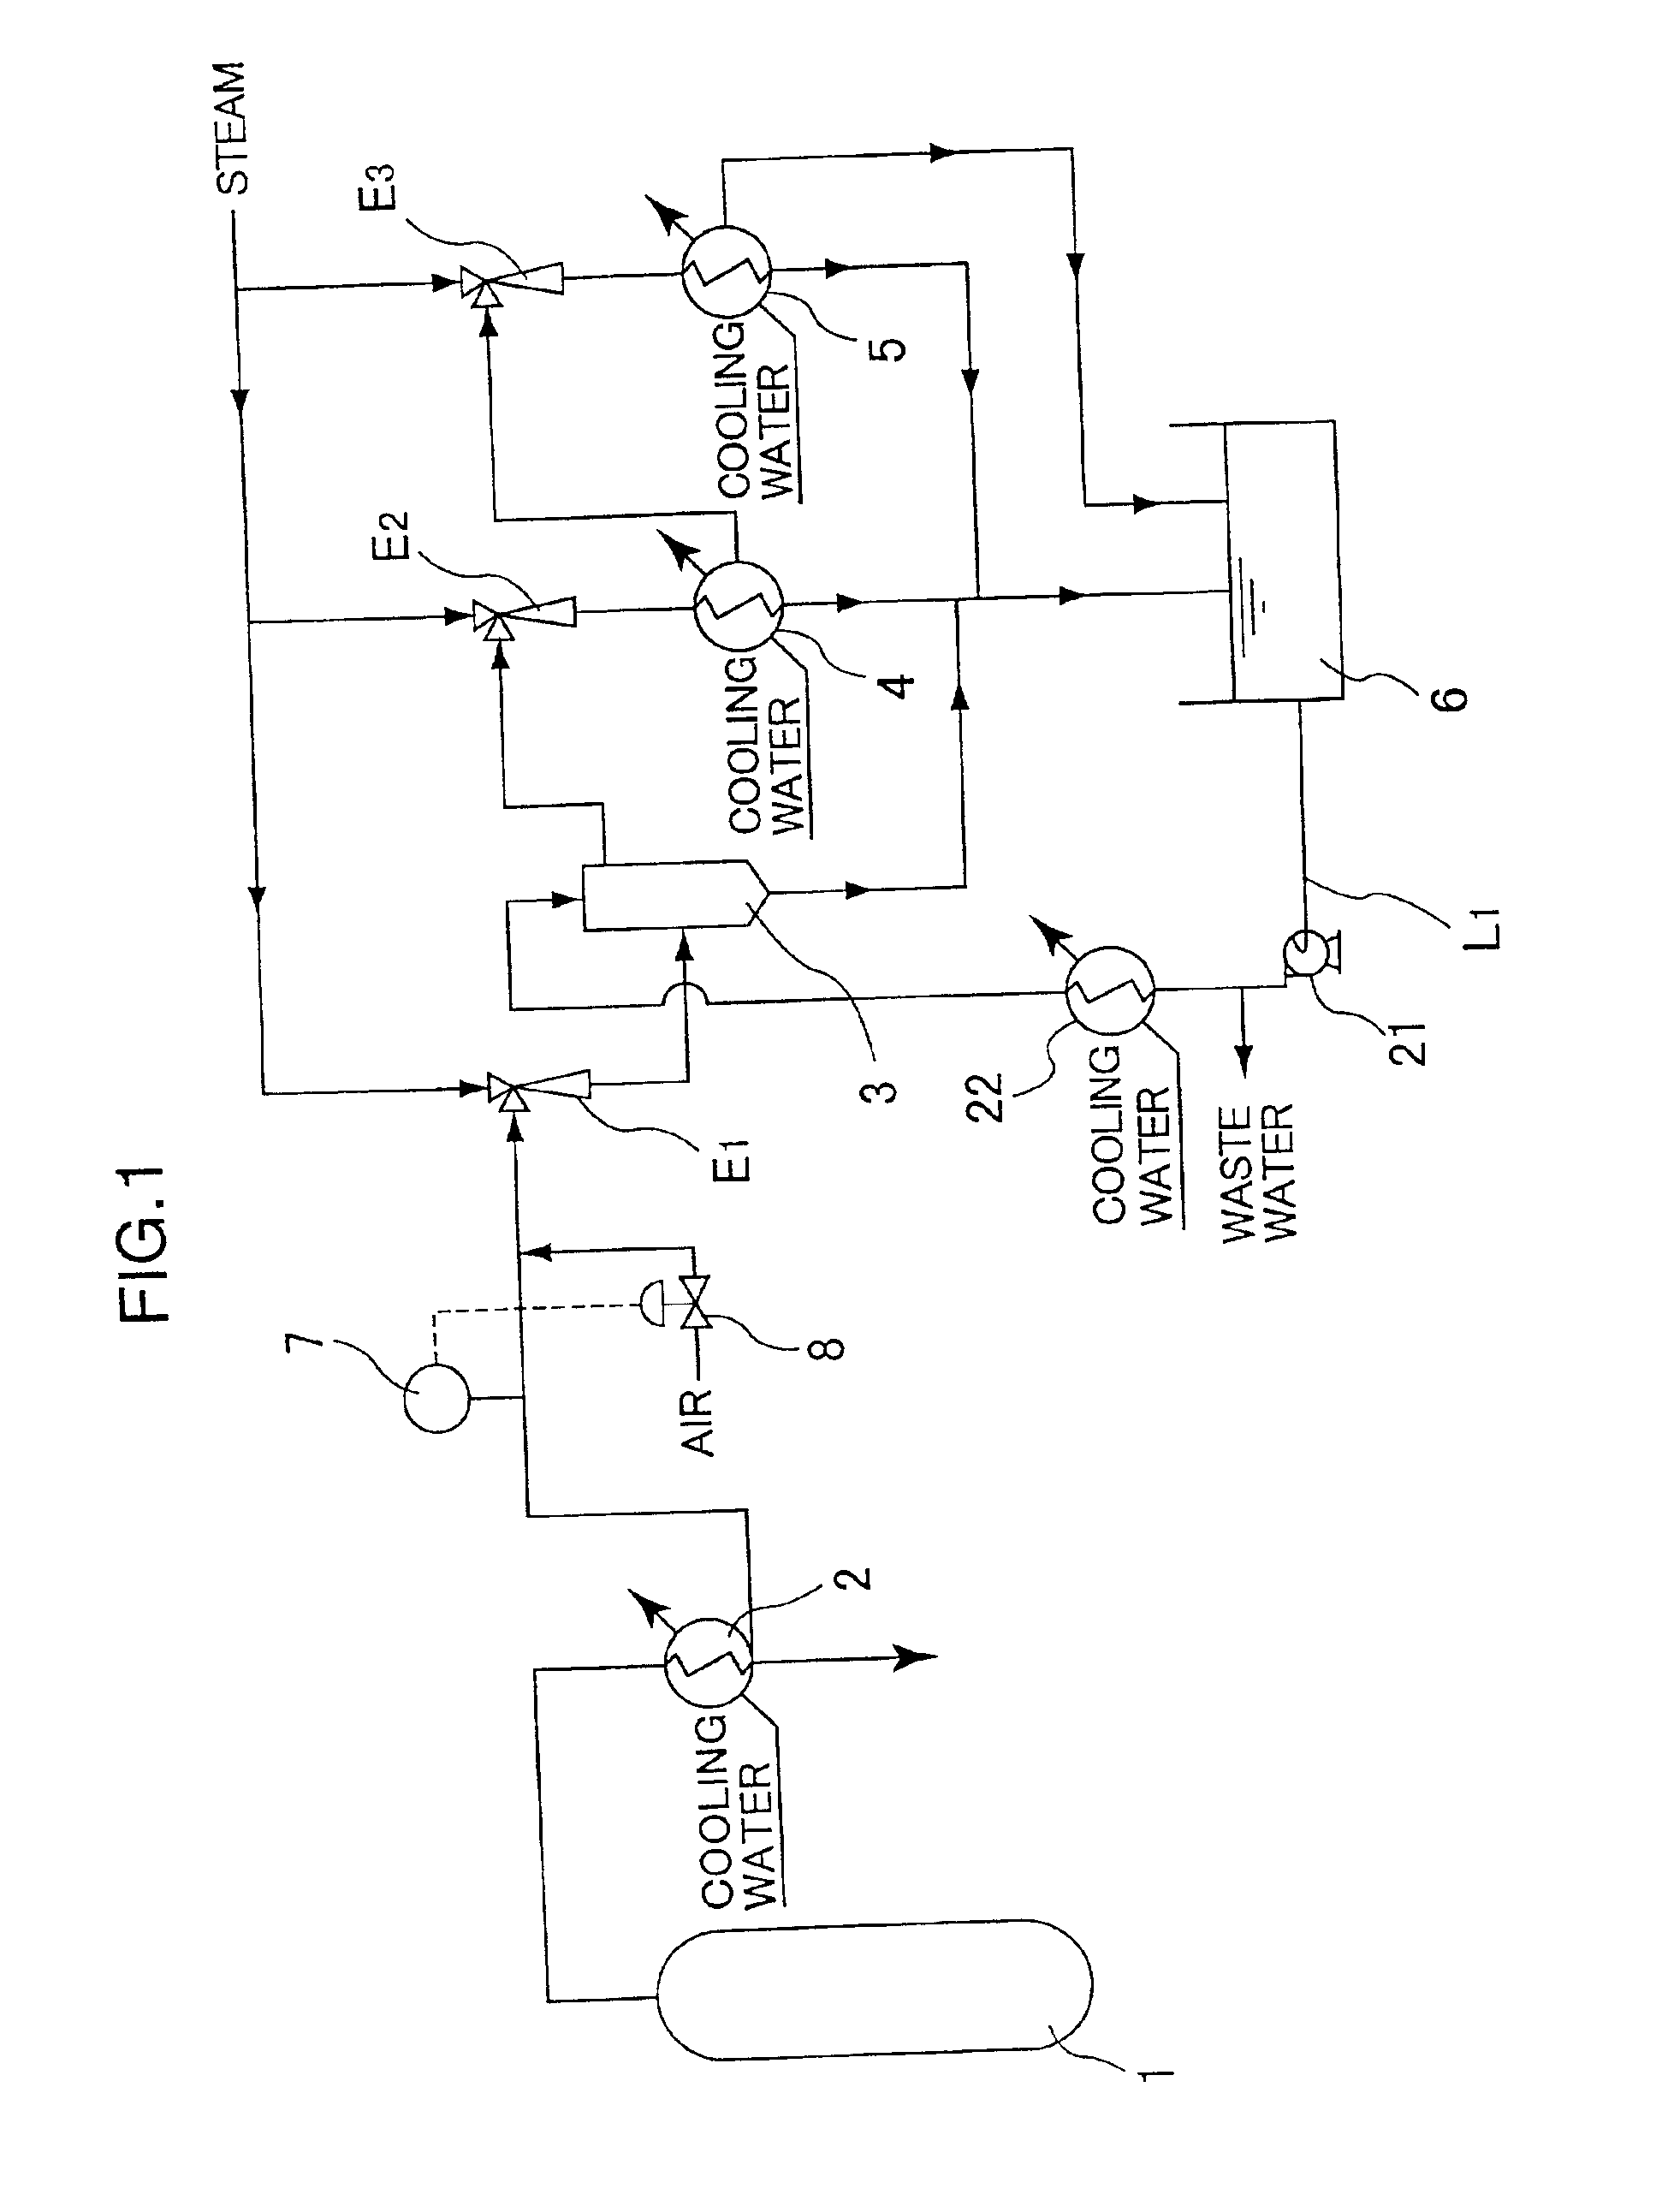 Process for inhibiting a polymerization in a vacuum section of an easily polymerizable compound purification system